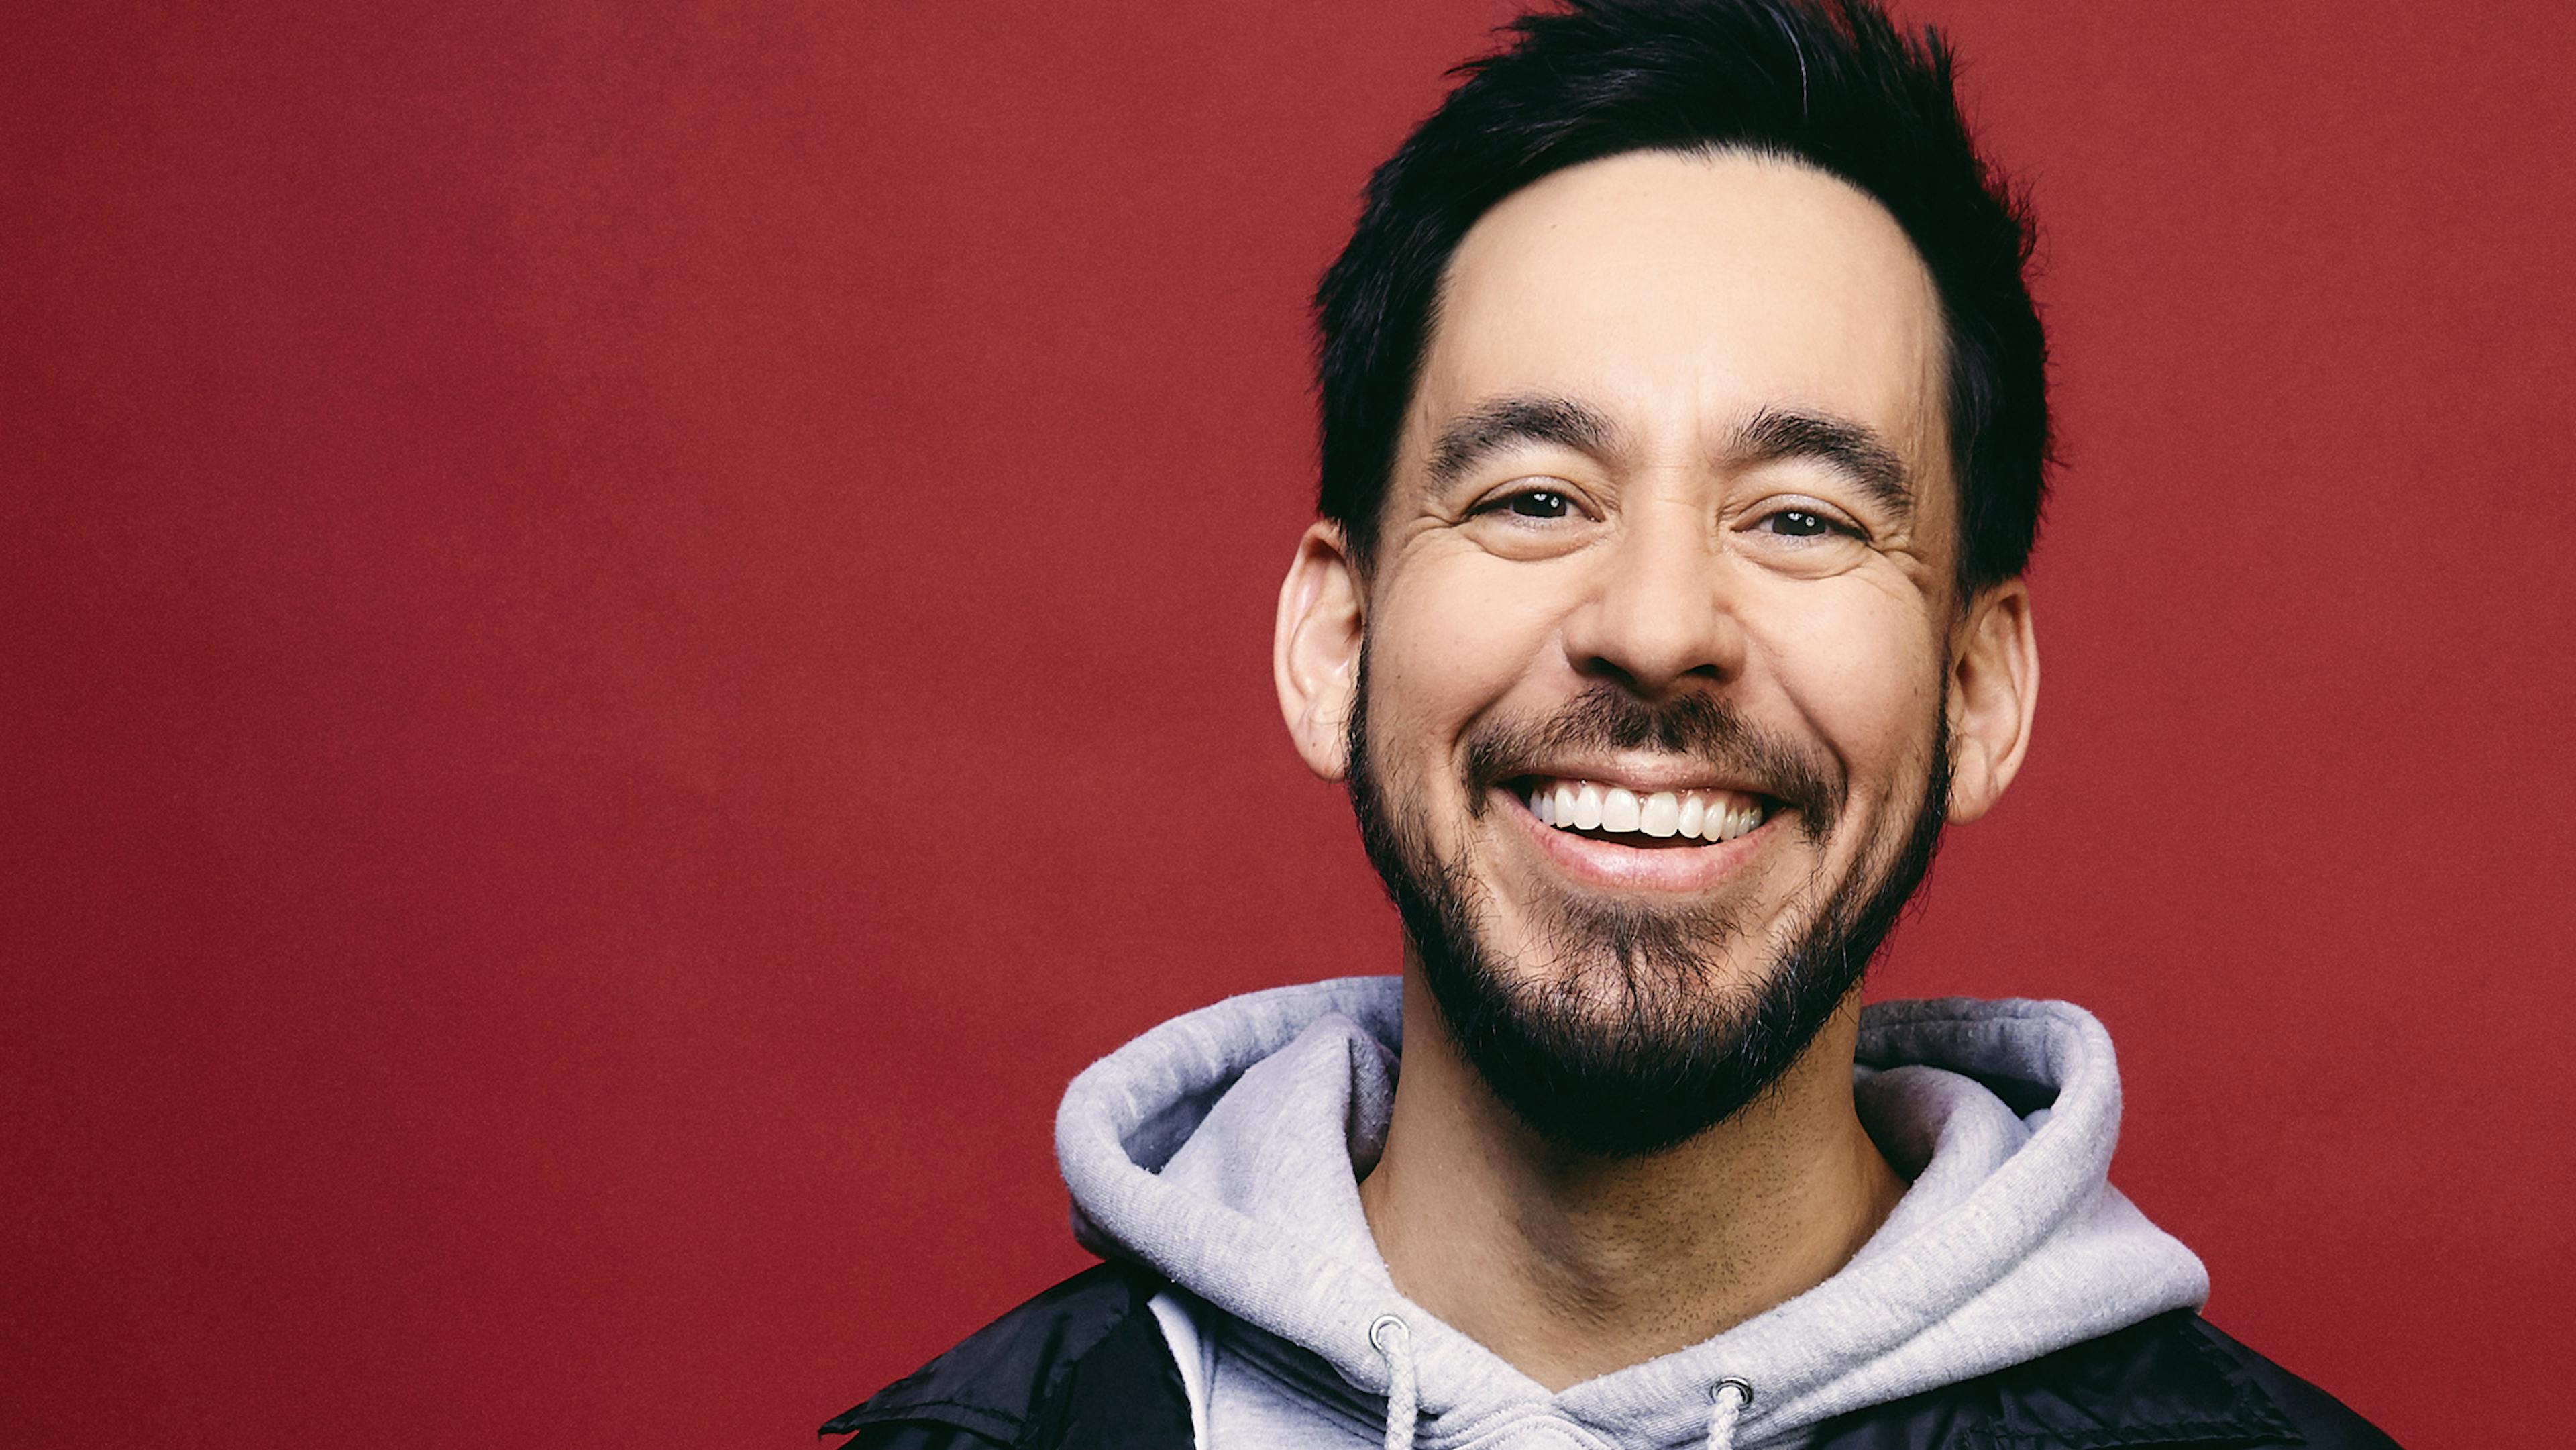 Fans think Mike Shinoda is teasing new music after he posts video shaving his head